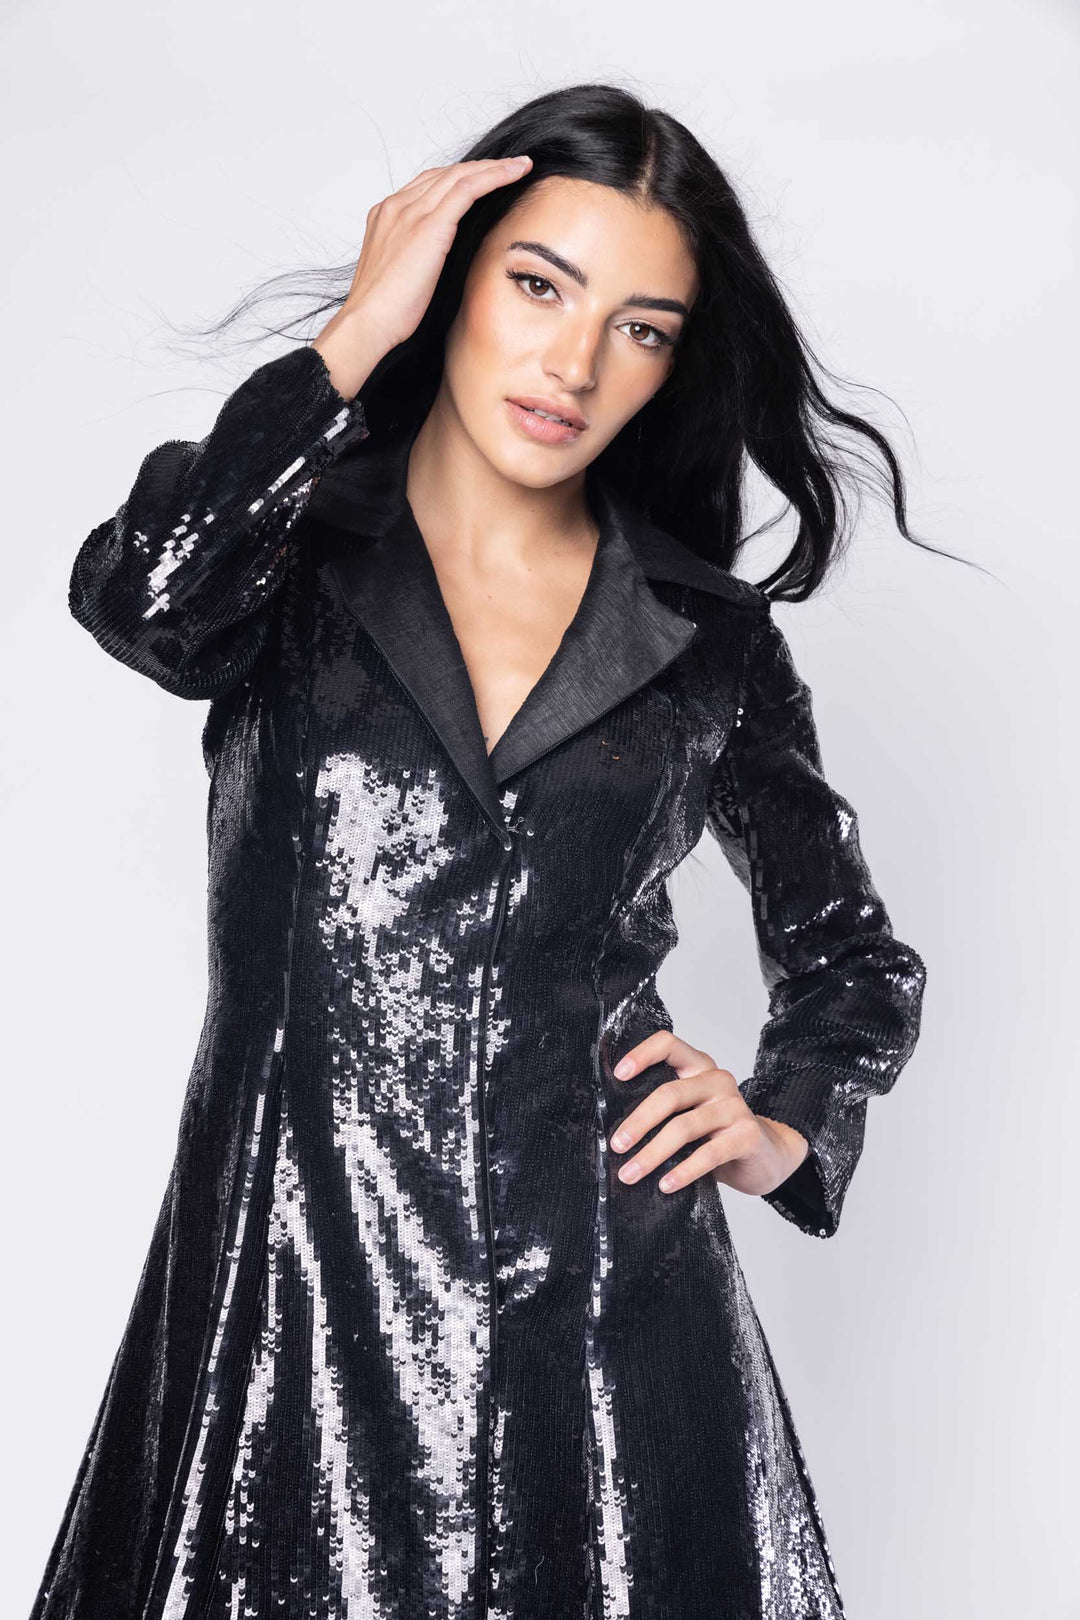 Beautiful model in an sequined, ornate Sujata Gazder jacket cocktail dress - close view